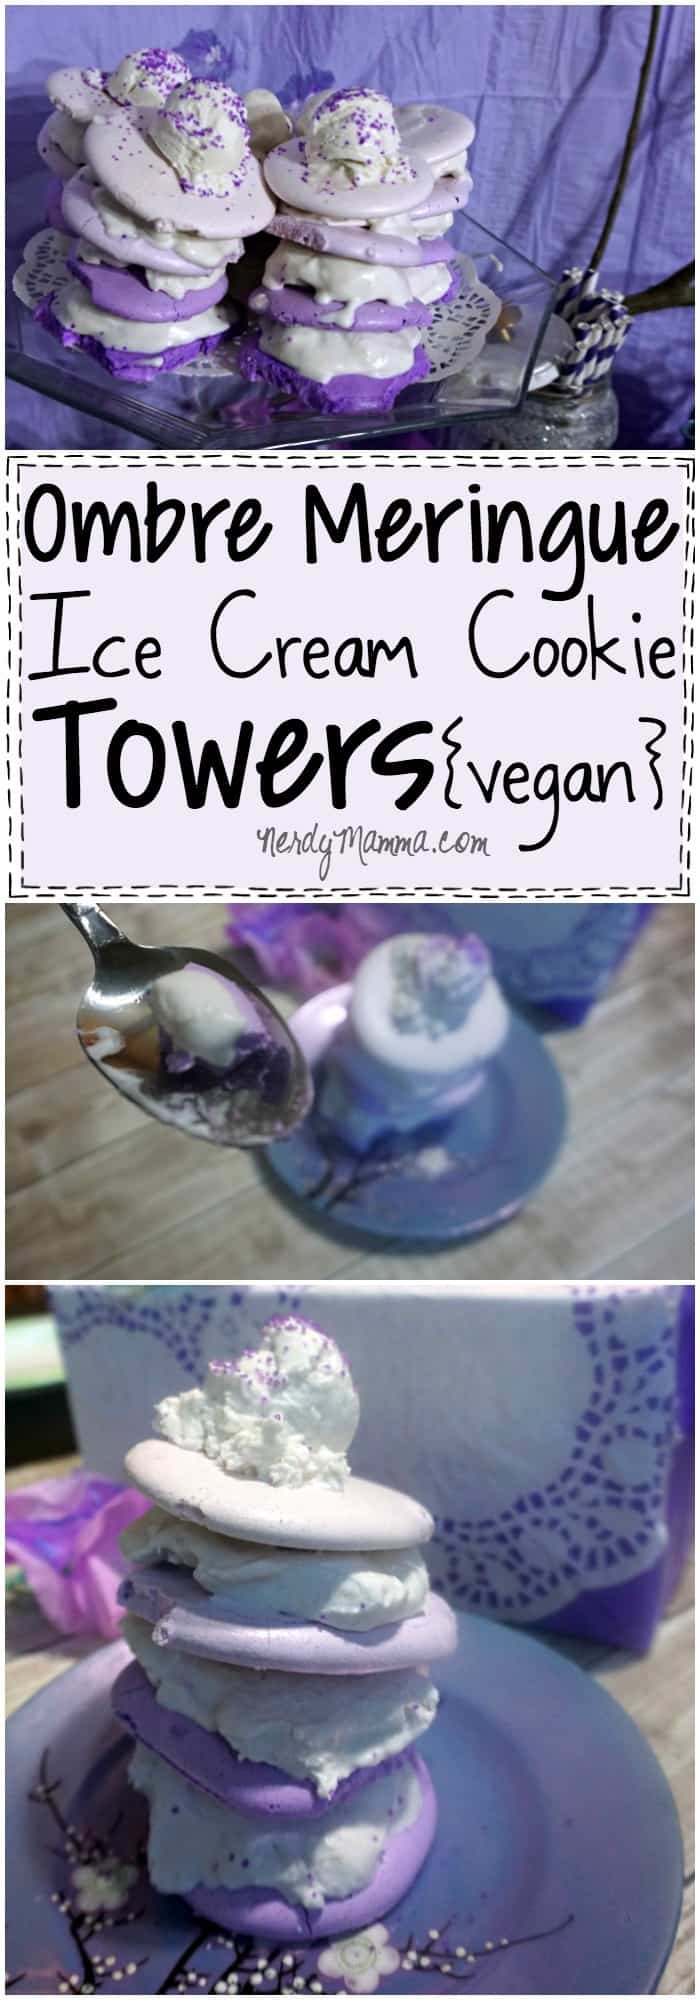 I love this recipe for Ombre Meringue Ice Cream Cookie Towers. Totally eggless, dairy-free and vegan...it sounds so yummy!